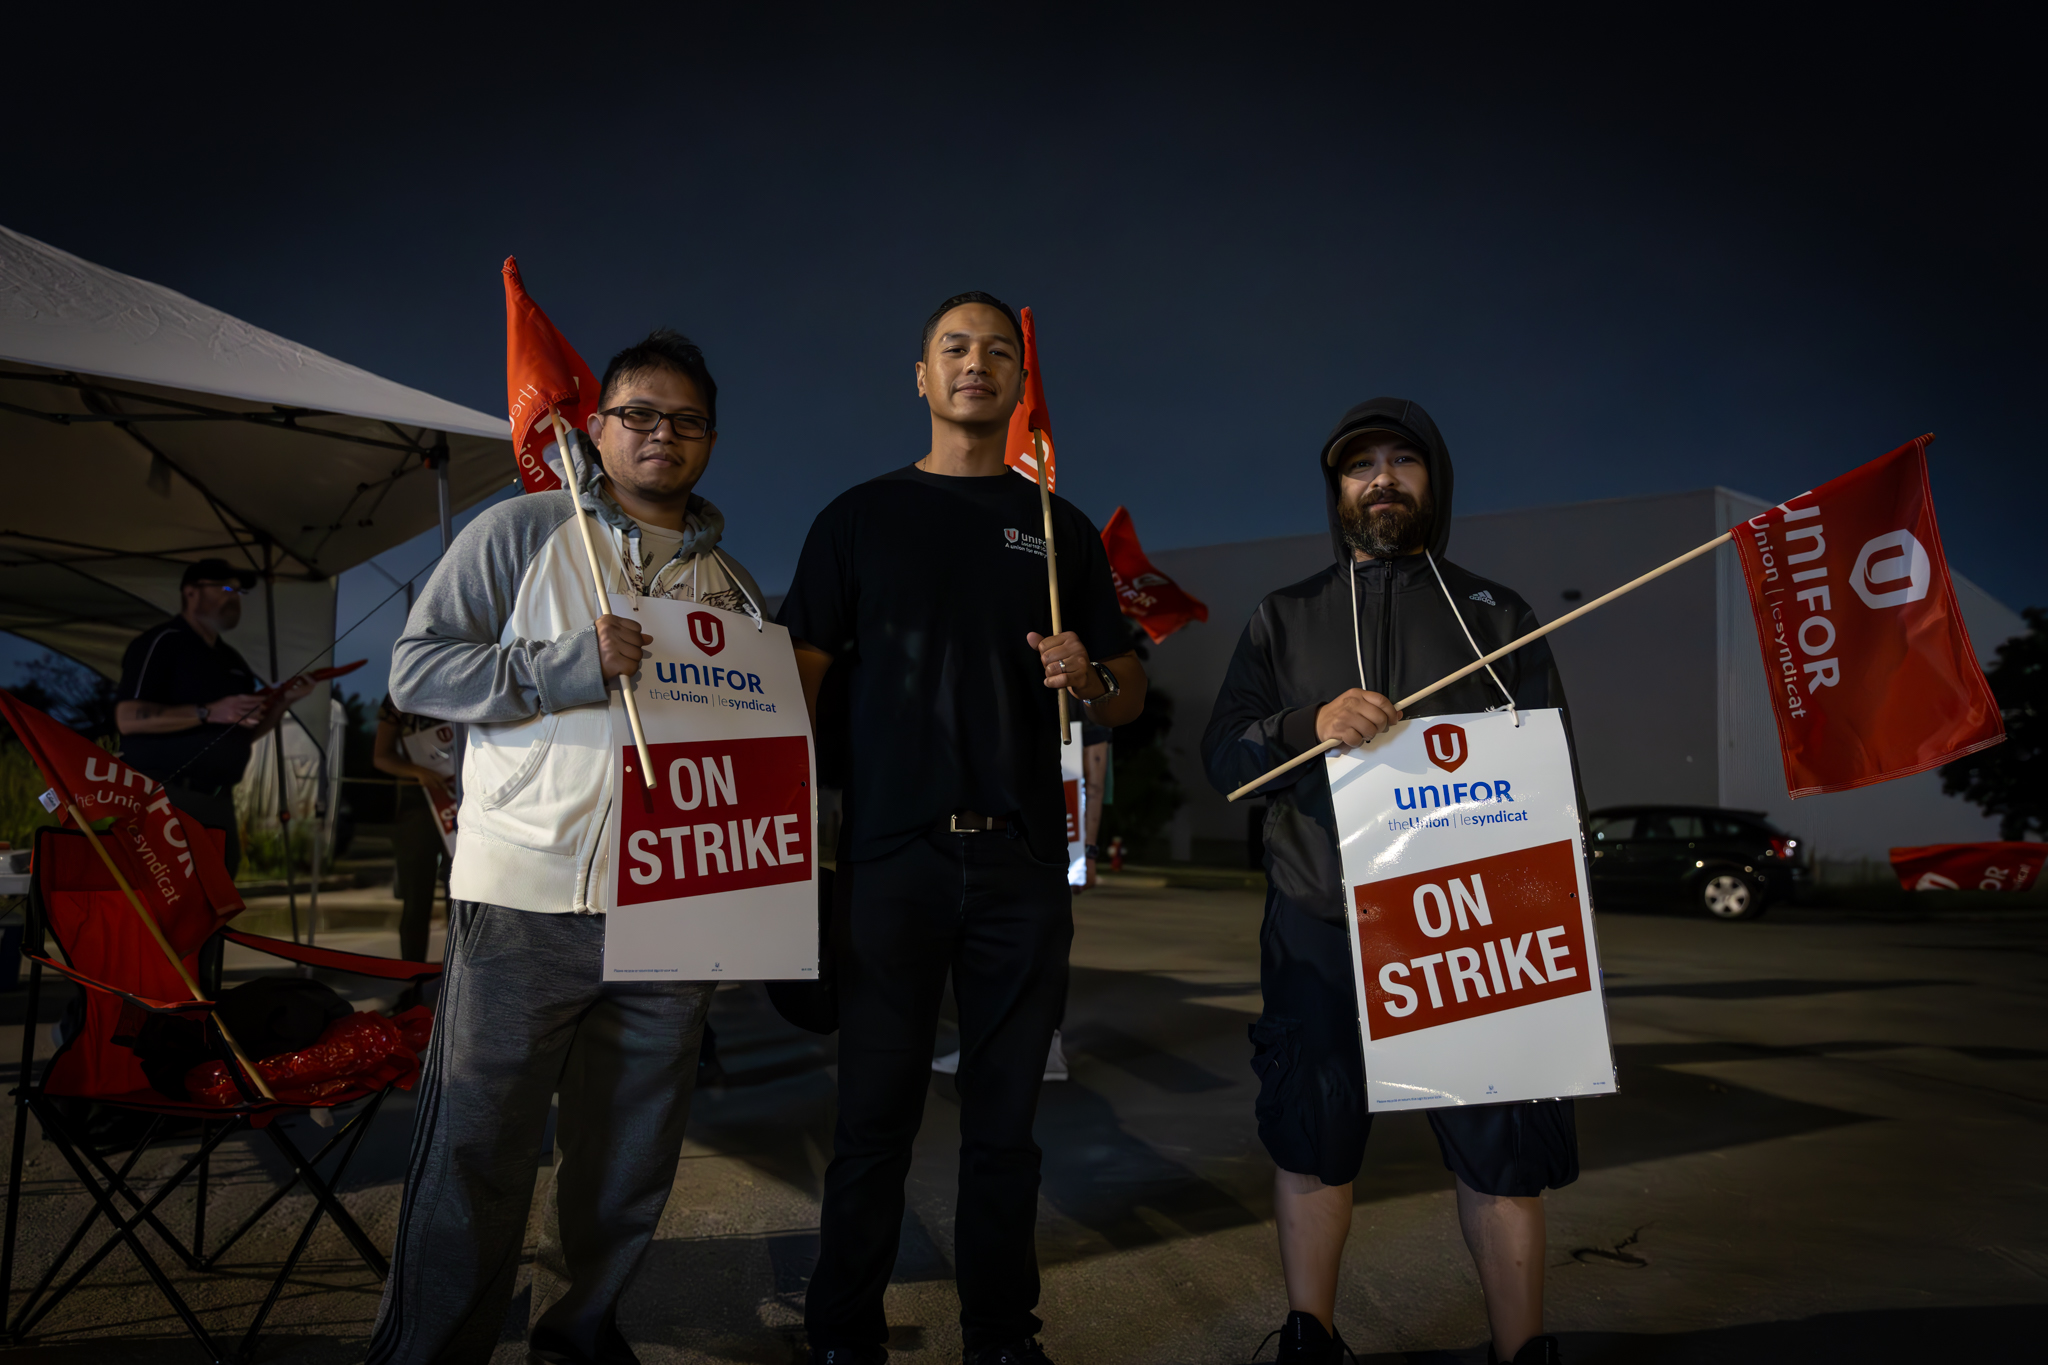 Three Unifor members wearing "on strike" signs and holding red Unifor flags standing on the Bombardier picket line.